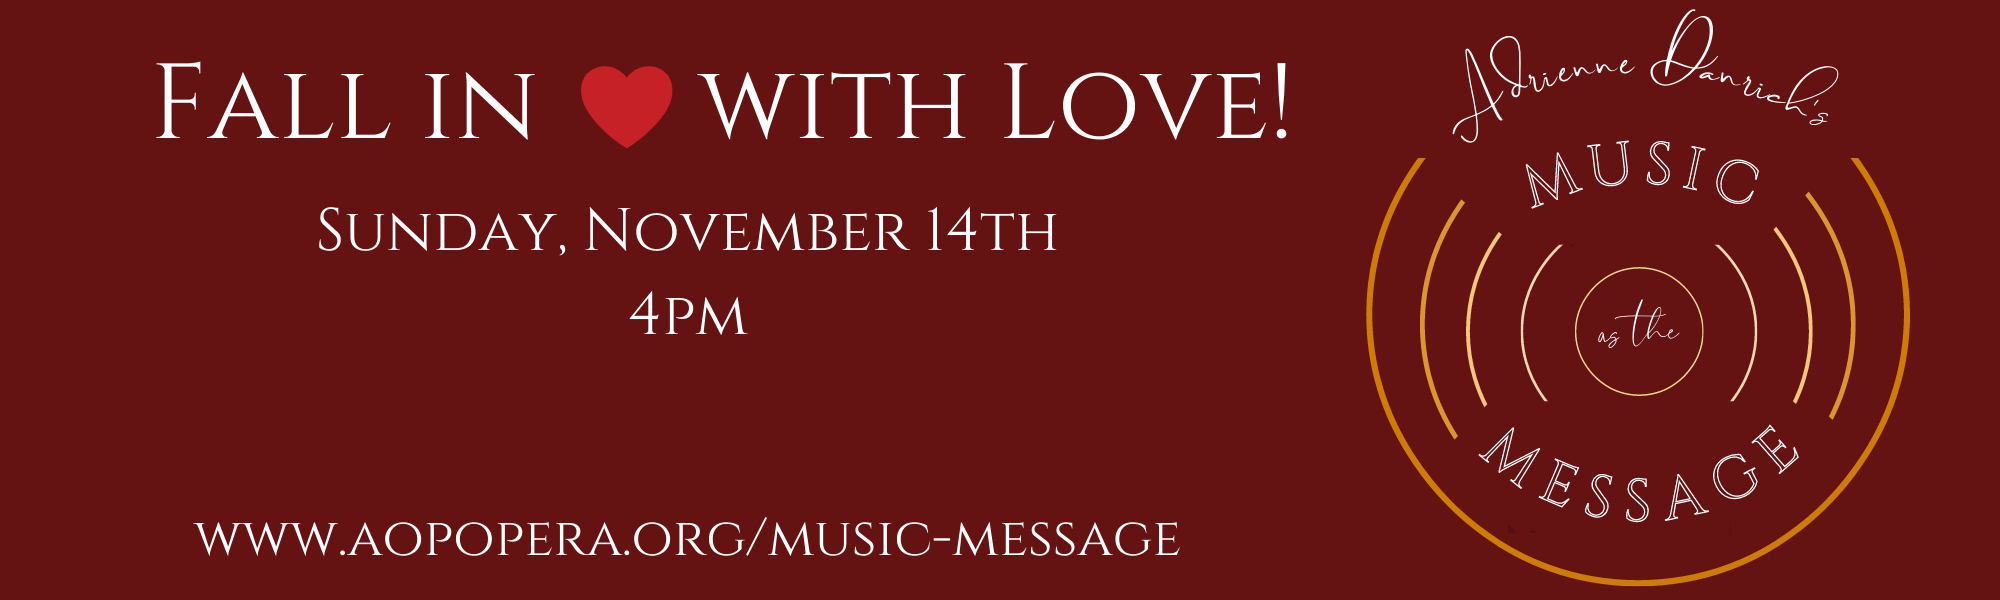 Music as the message - Fall in love with love on Sun, Nov 14 at 4 pm 